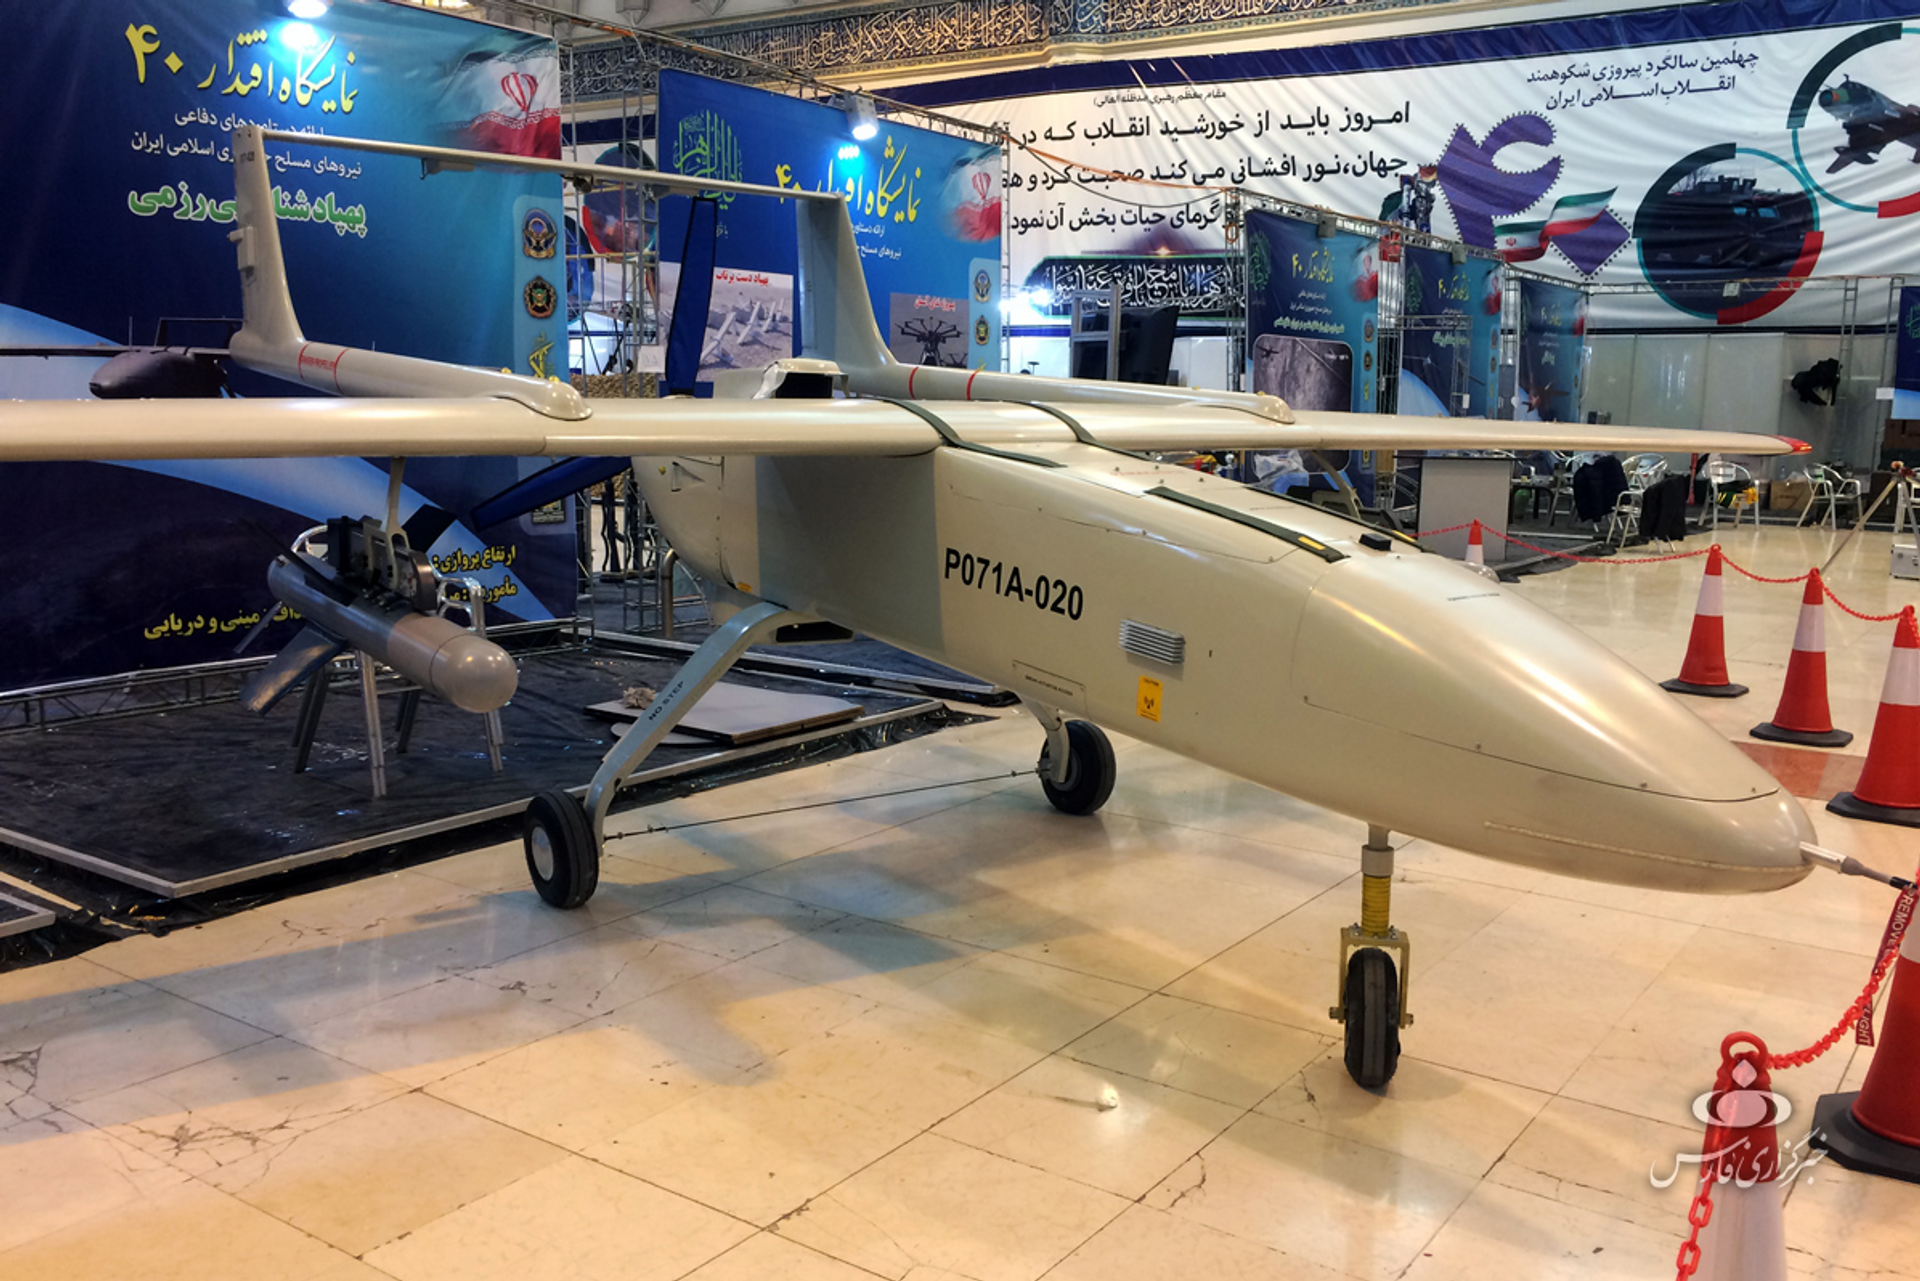 Mohajer-6 UAV with serial number P071A-020 seen during the Eqtedar 40 defence exhibition in Tehran. - Sputnik International, 1920, 20.10.2022